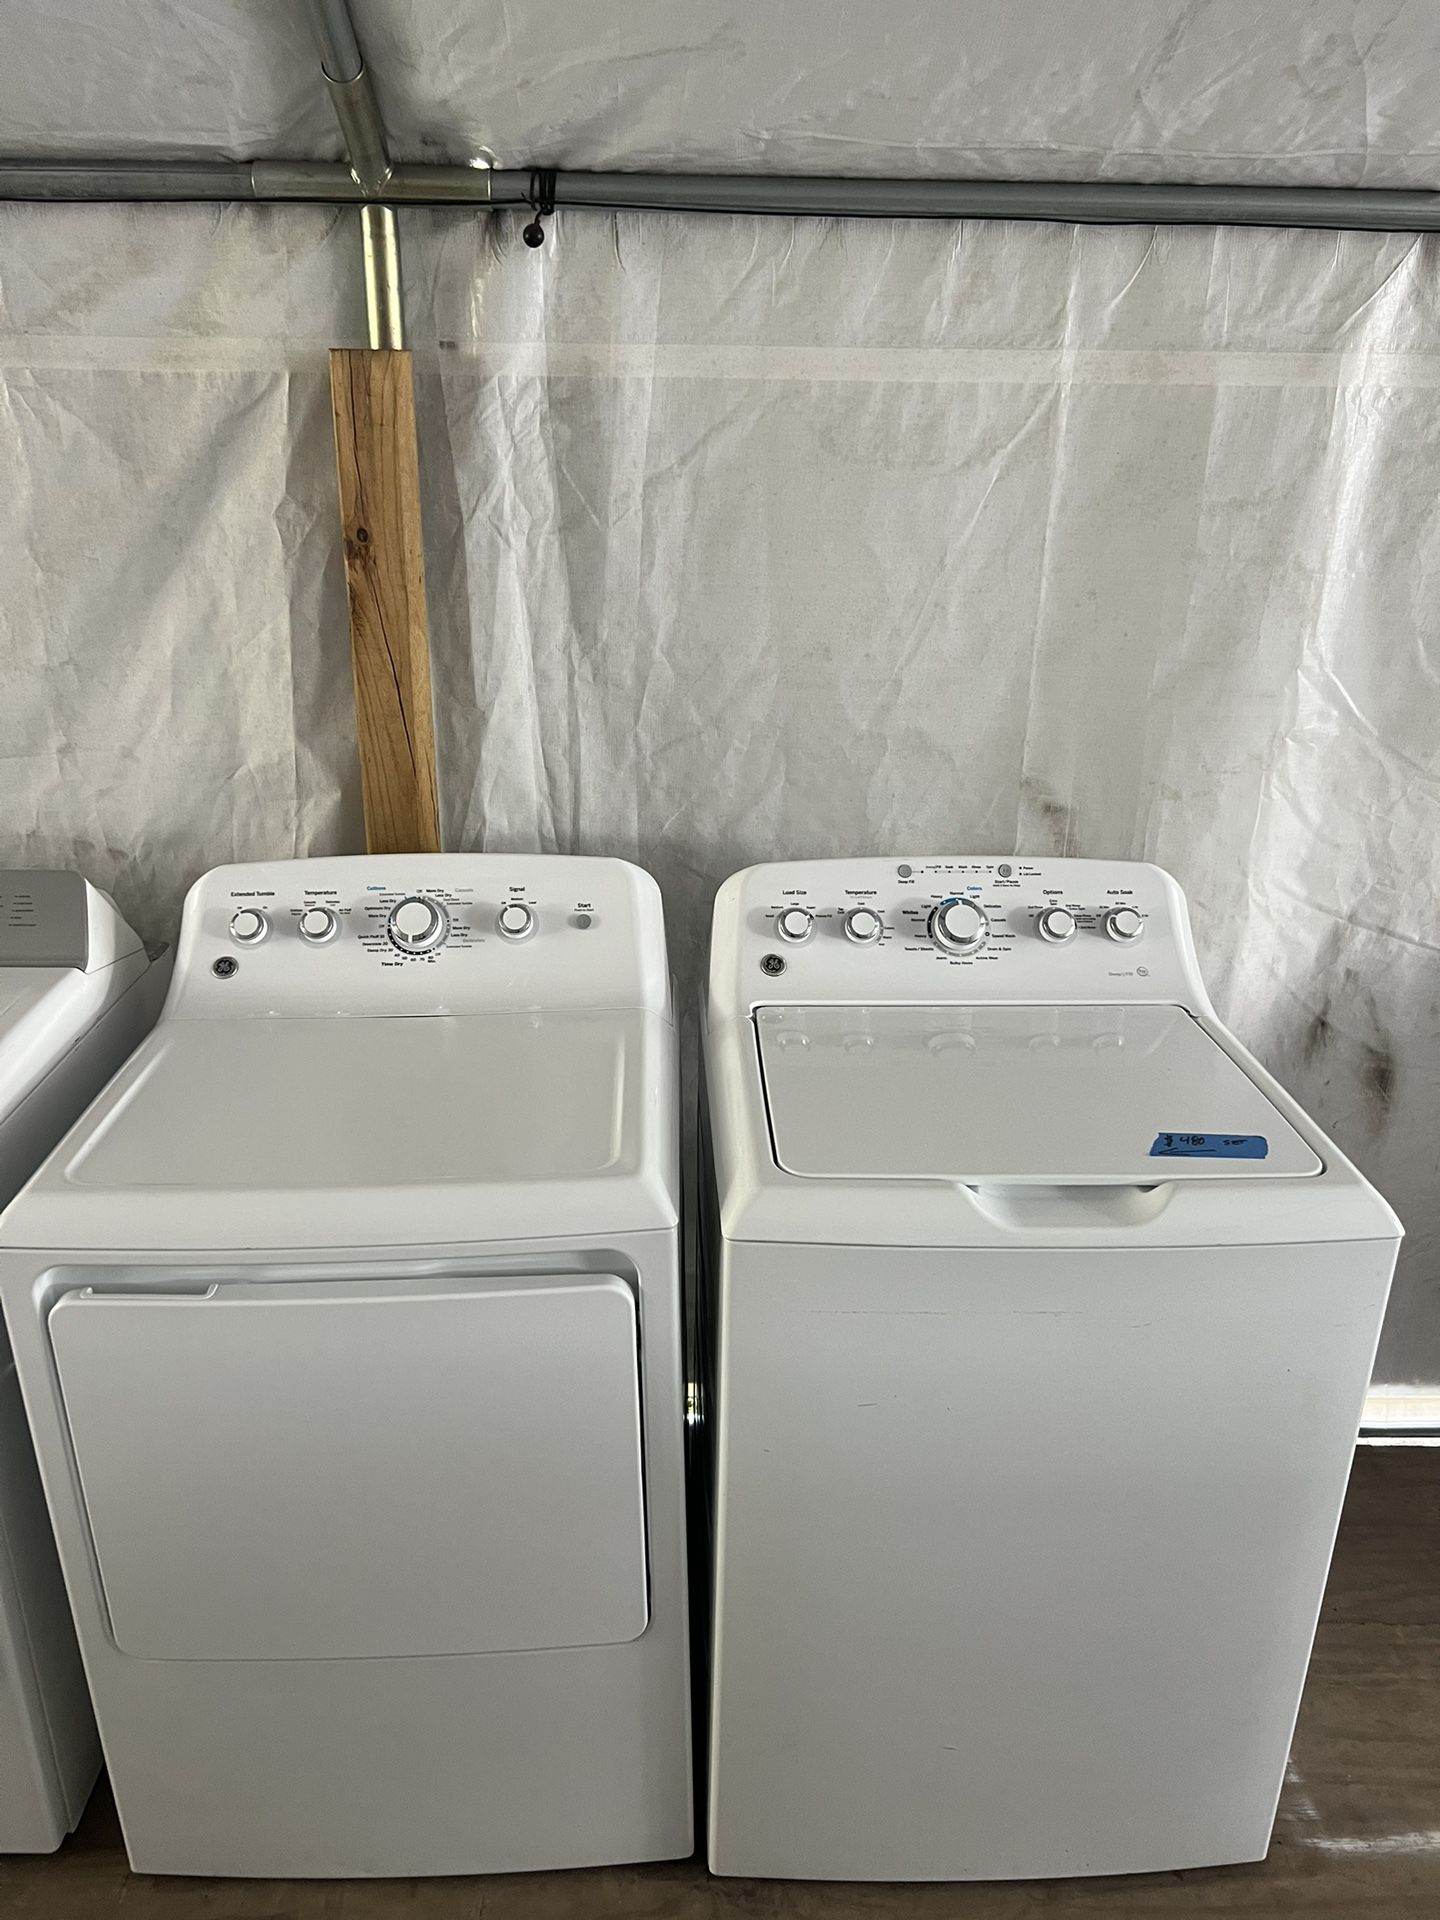 Ge Washer&dryer Large Capacity Set    60 day warranty/ Located at:📍5415 Carmack Rd Tampa Fl 33610📍